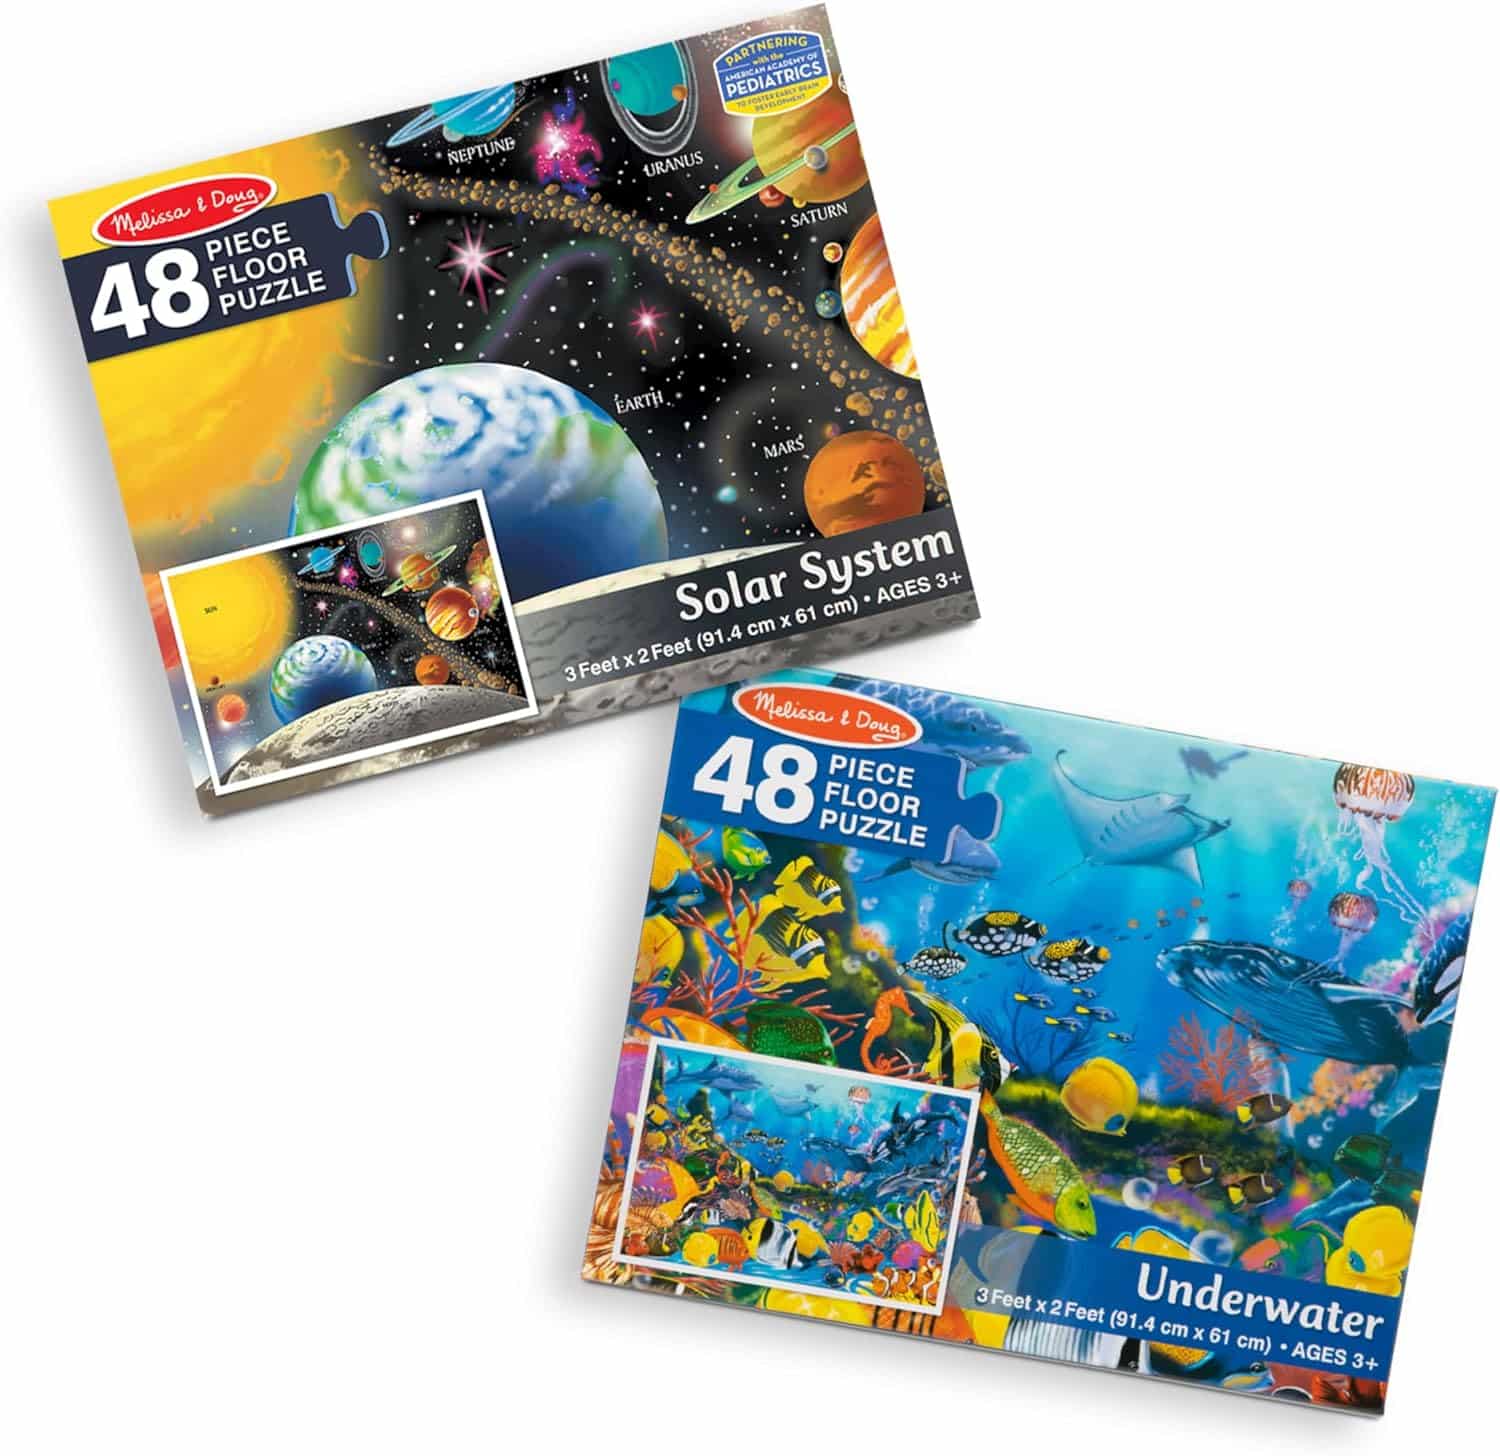 Melissa & Doug Jumbo Jigsaw Floor Puzzle Set - Solar System and Underwater (2 x 3 feet each) - Ocean Puzzles, Planet Puzzles, Educational Puzzles, Large Floor Puzzles For Kids Ages 3+